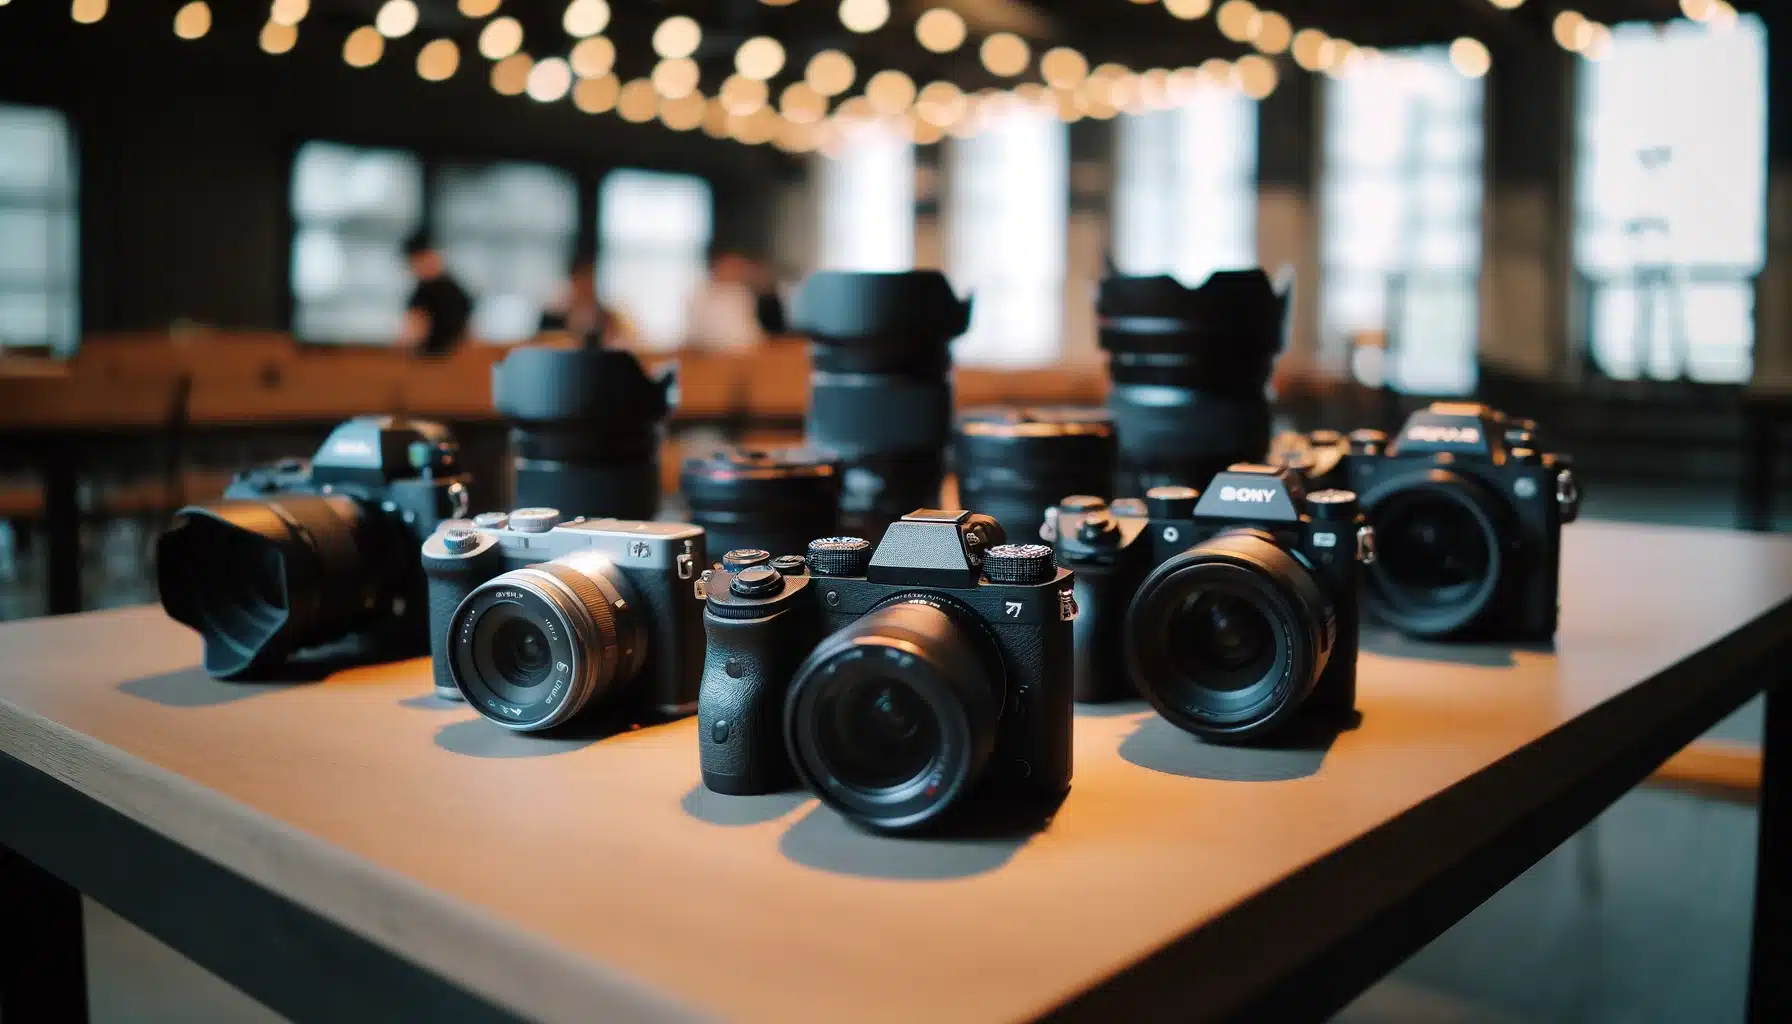 Five different cameras placed neatly on a table in a well-lit indoor setting, showcasing a range of models from entry-level to professional, highlighting their features and designs.